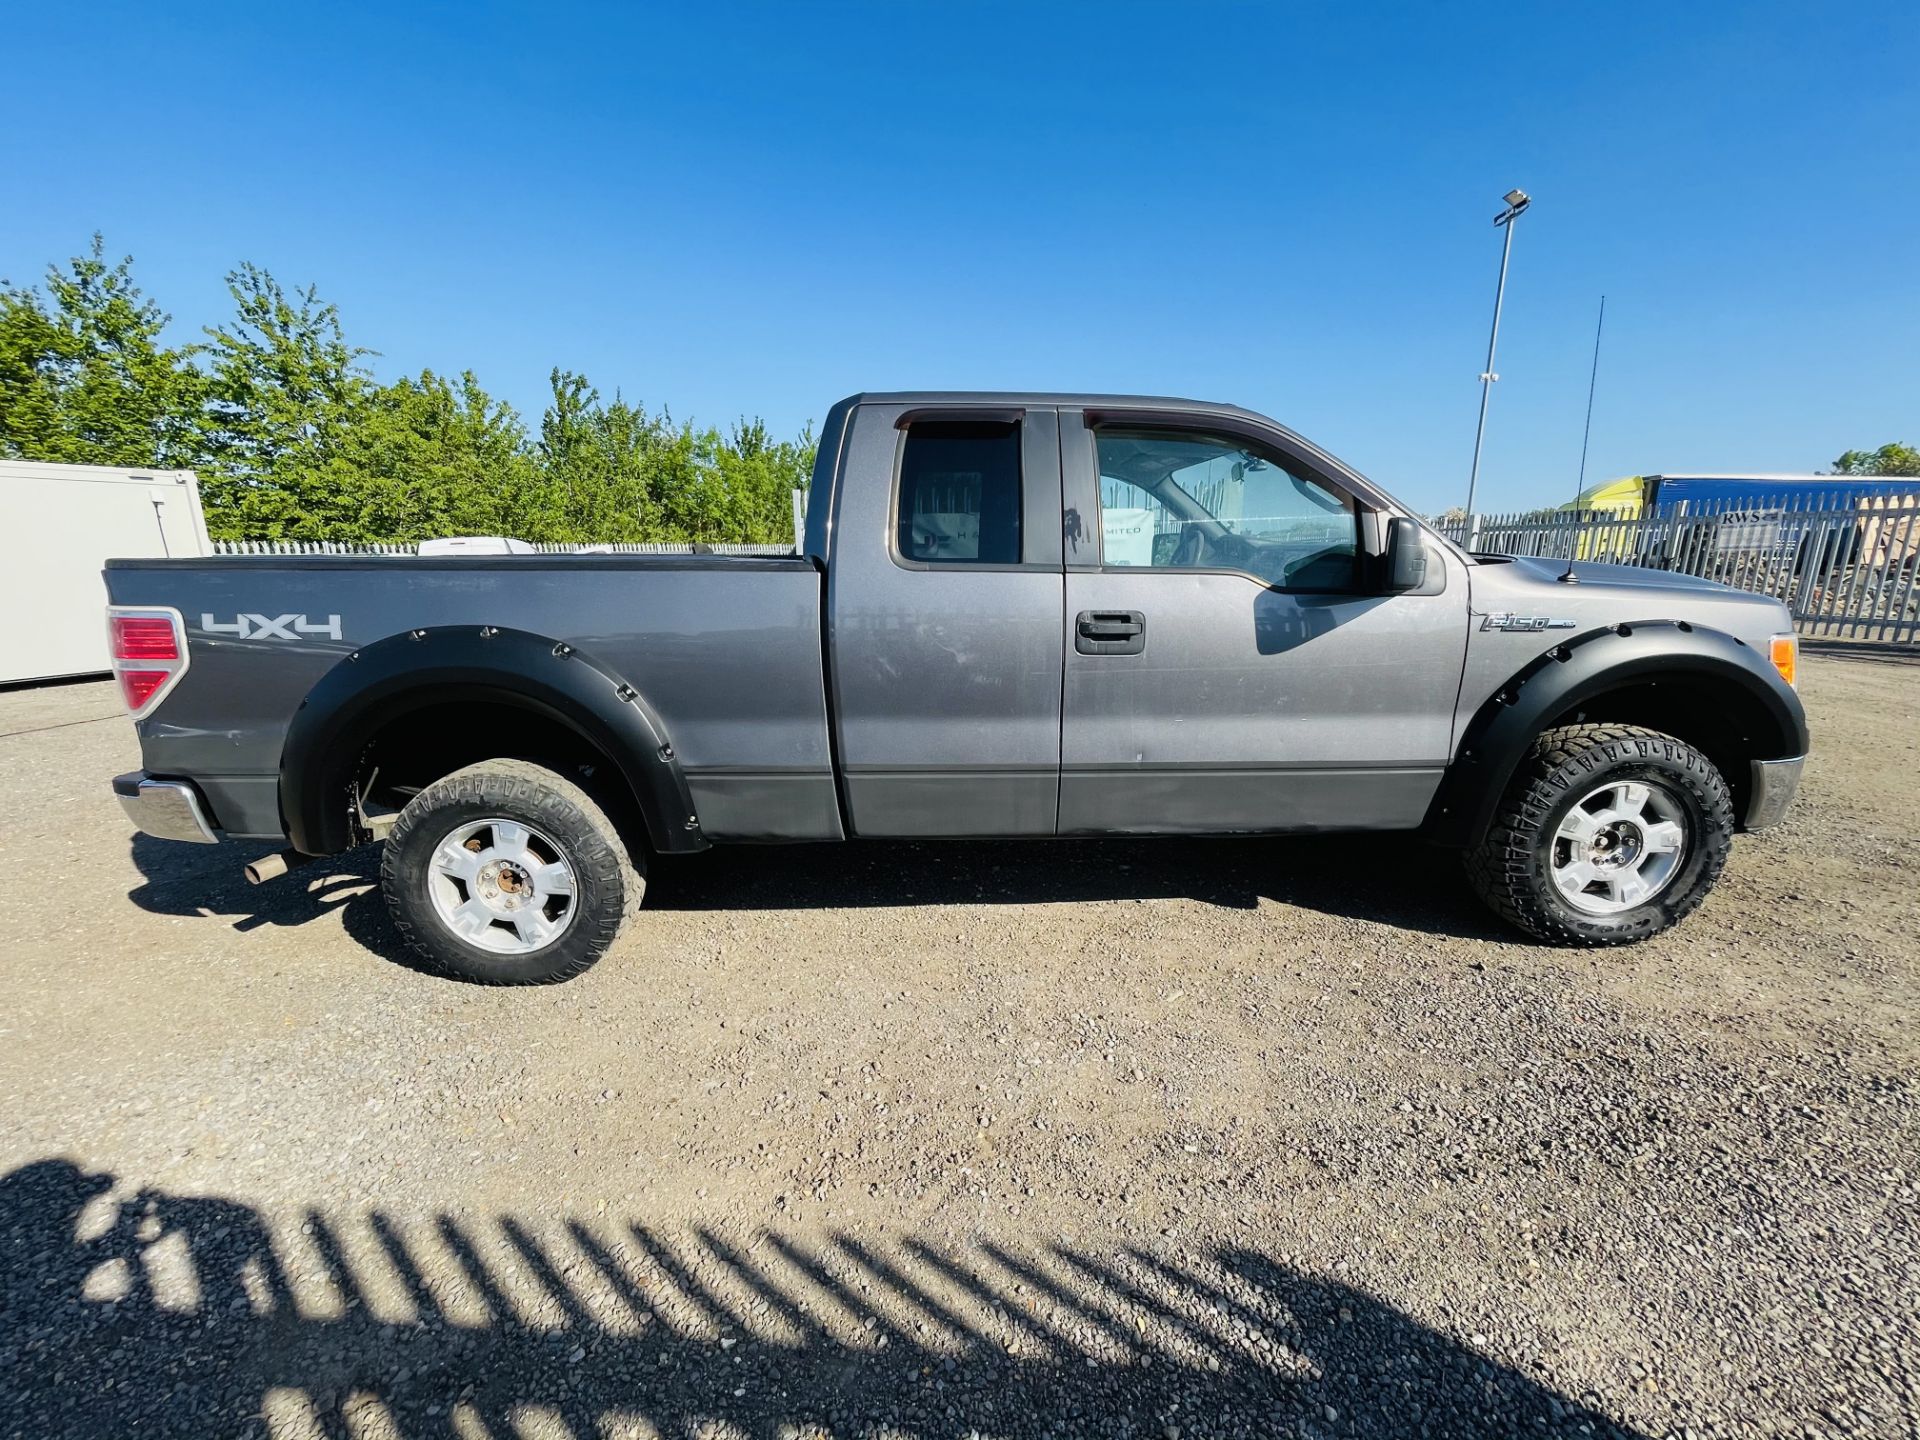 Ford F-150 4.6L V8 XLT Edition Super-Cab 4x4 '2010 Year' Air Con - 6 seats - Fully U.K Registered - Image 9 of 15